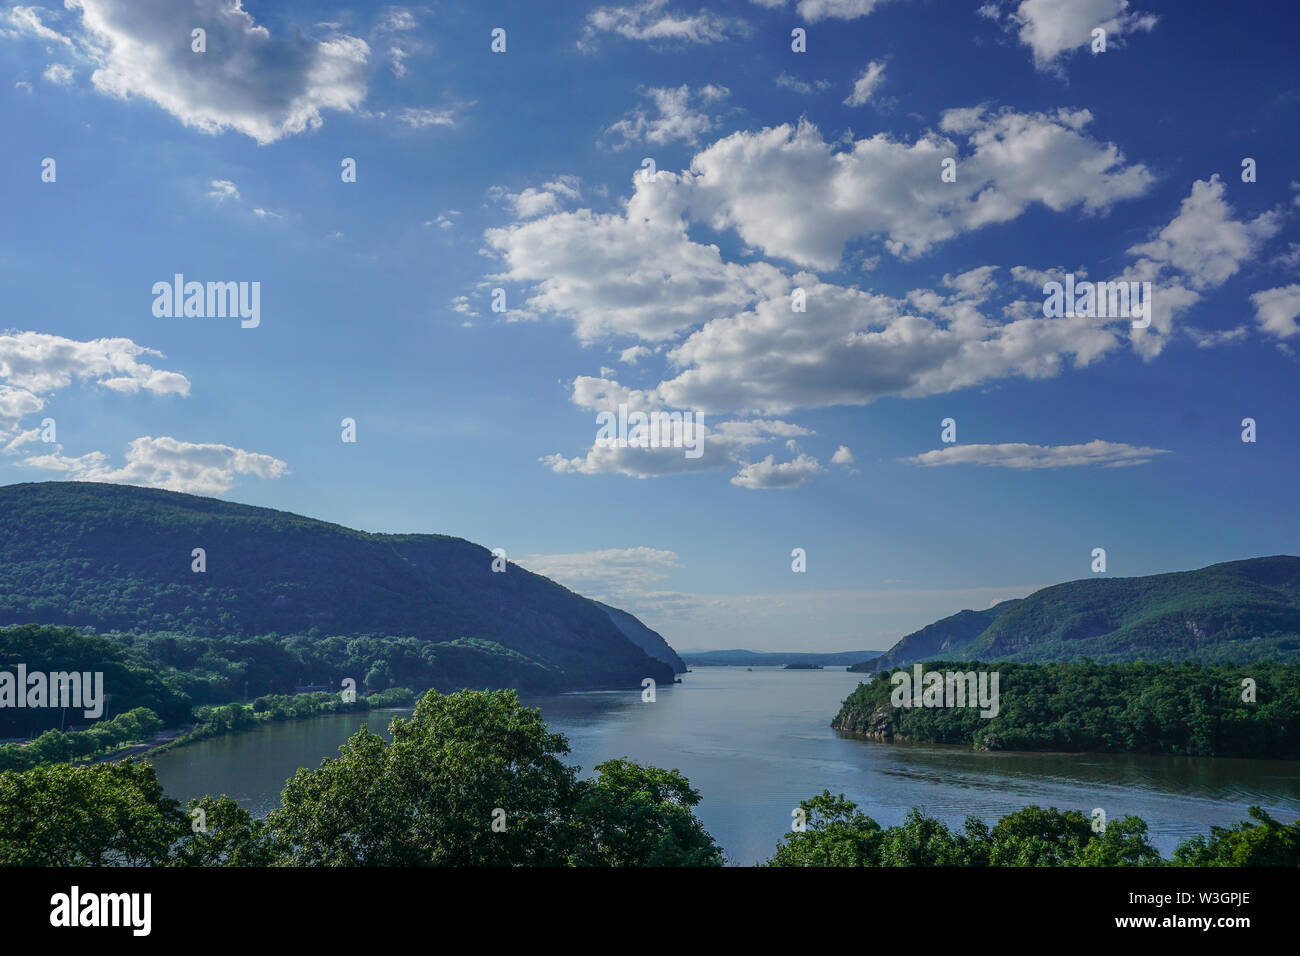 West Point, New York: View of the Hudson River looking north from the Overlook at the United States Military Academy at West Point. Stock Photo